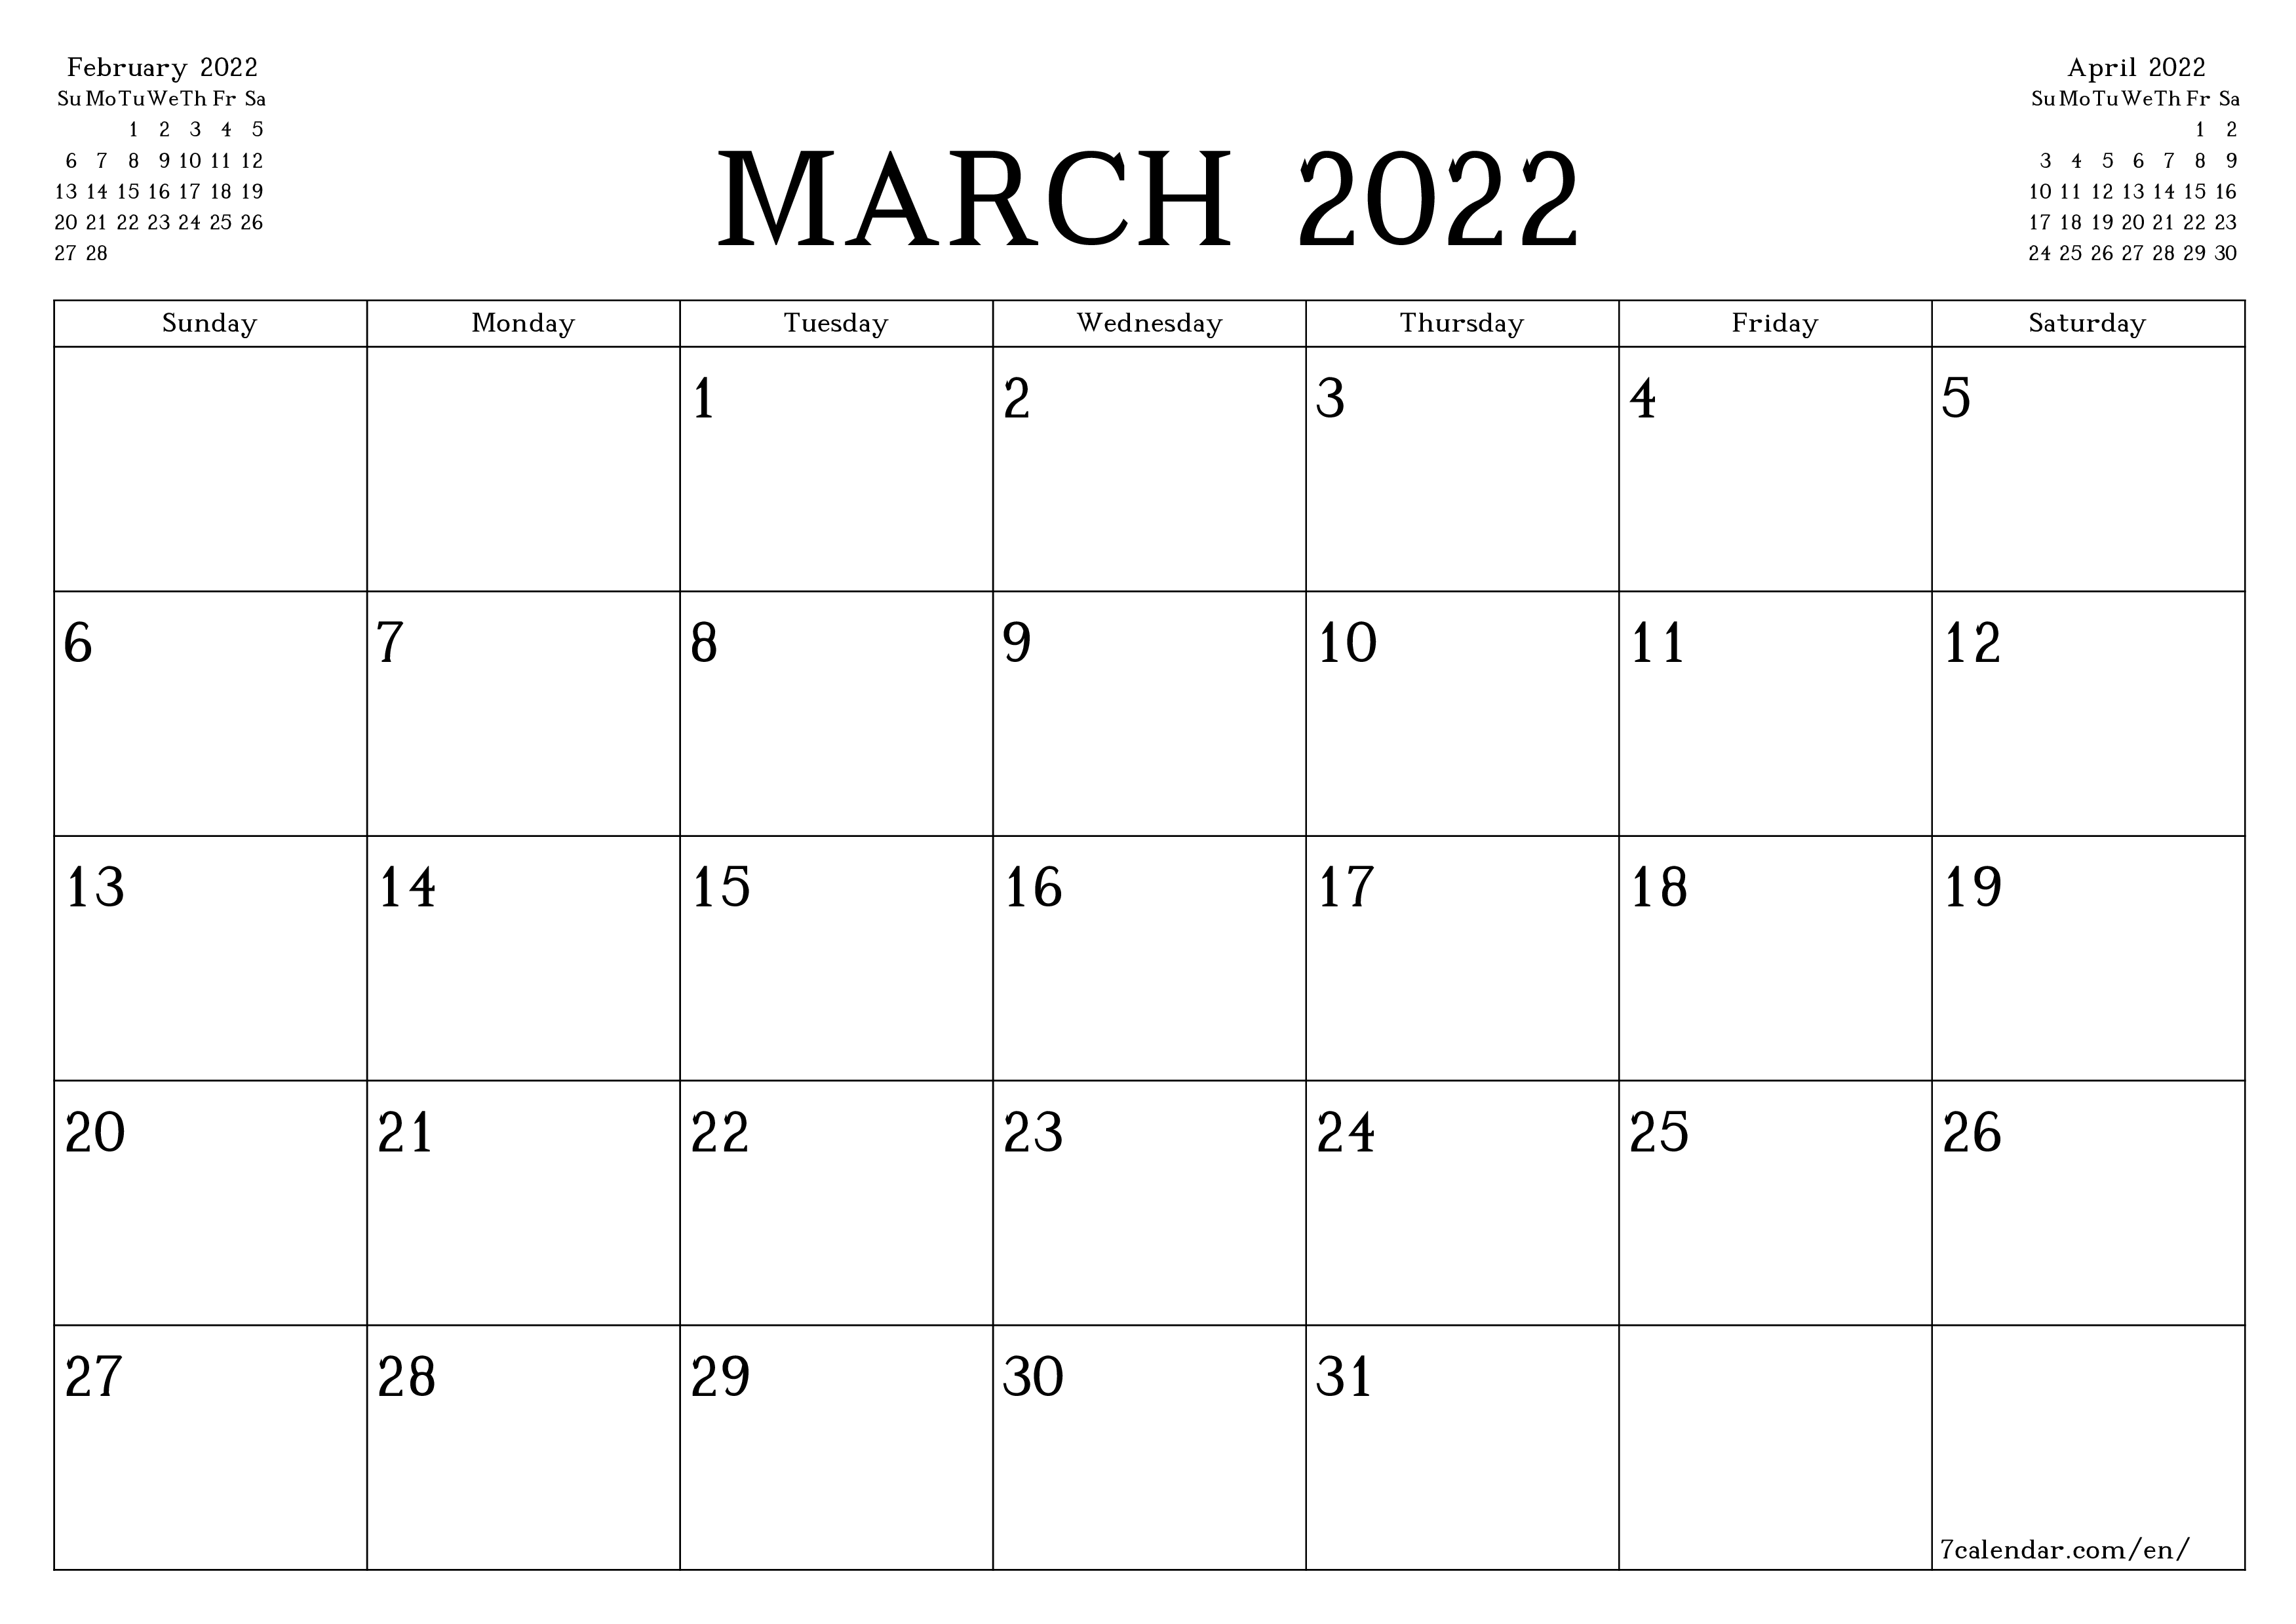 Printable Calendar 2022 By Month March 2022 Free Printable Calendars And Planners, Pdf Templates - 7Calendar